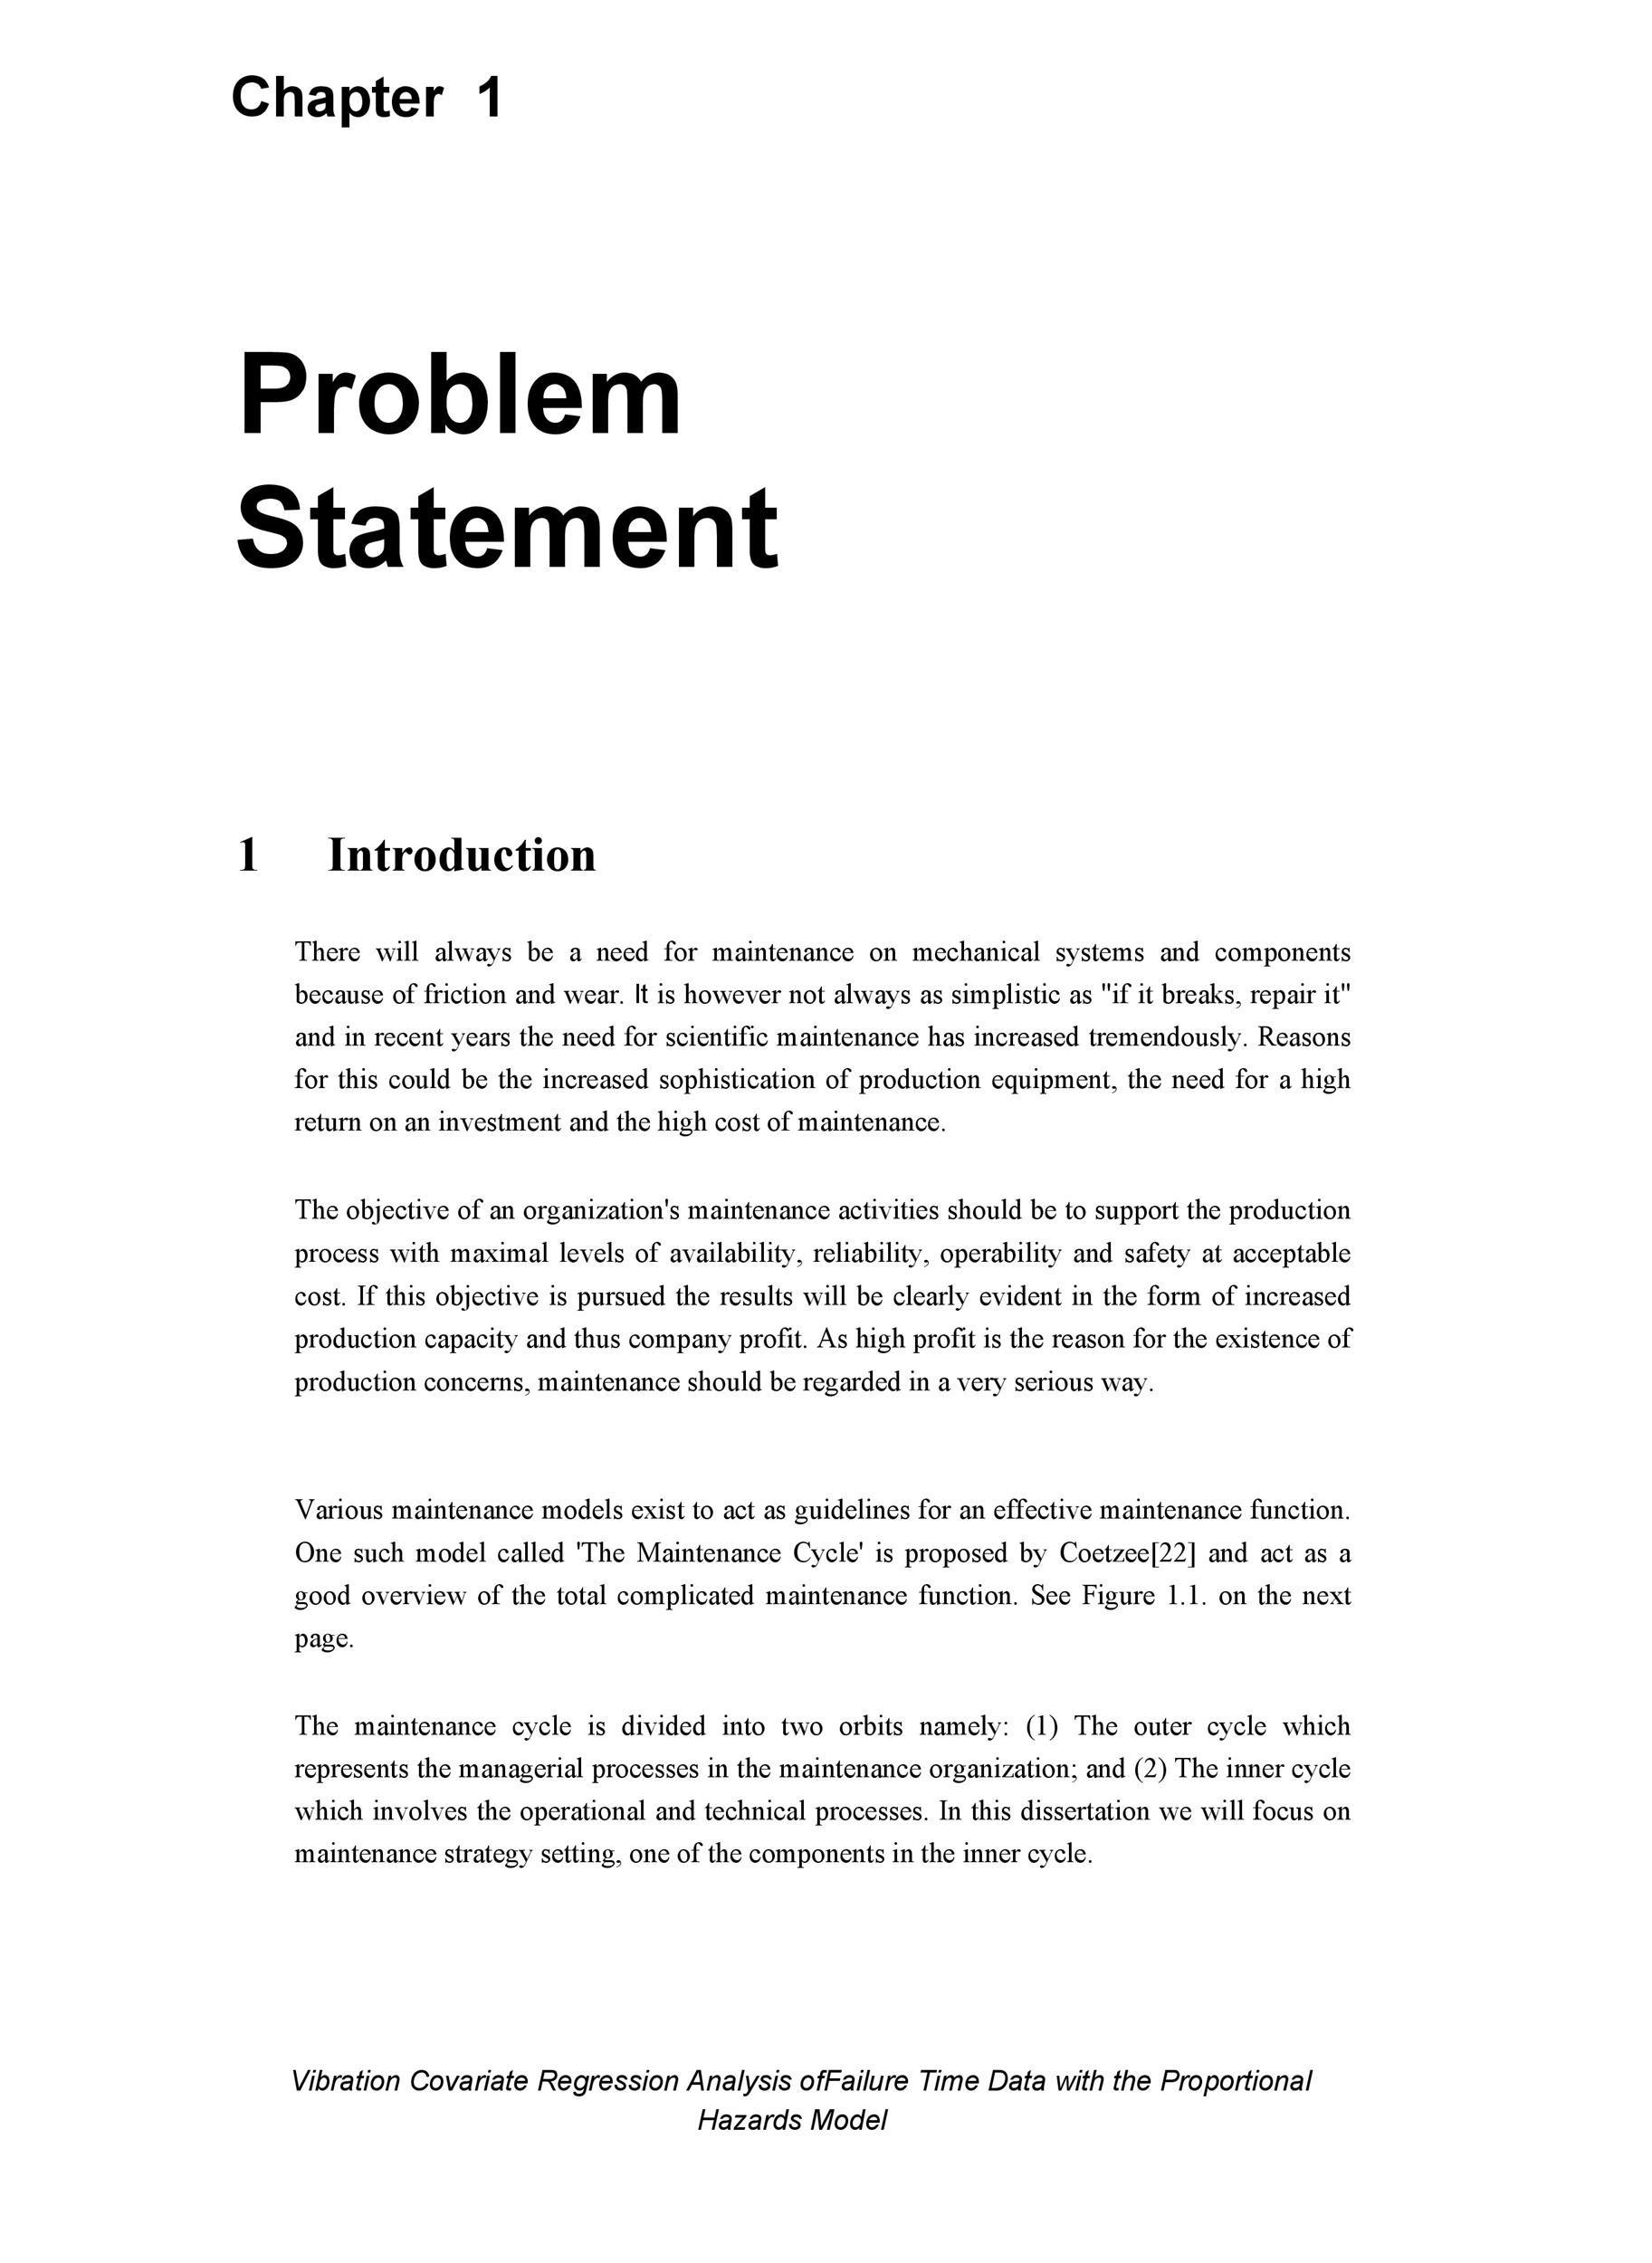 Research example proposal of problem in statement Problem statement